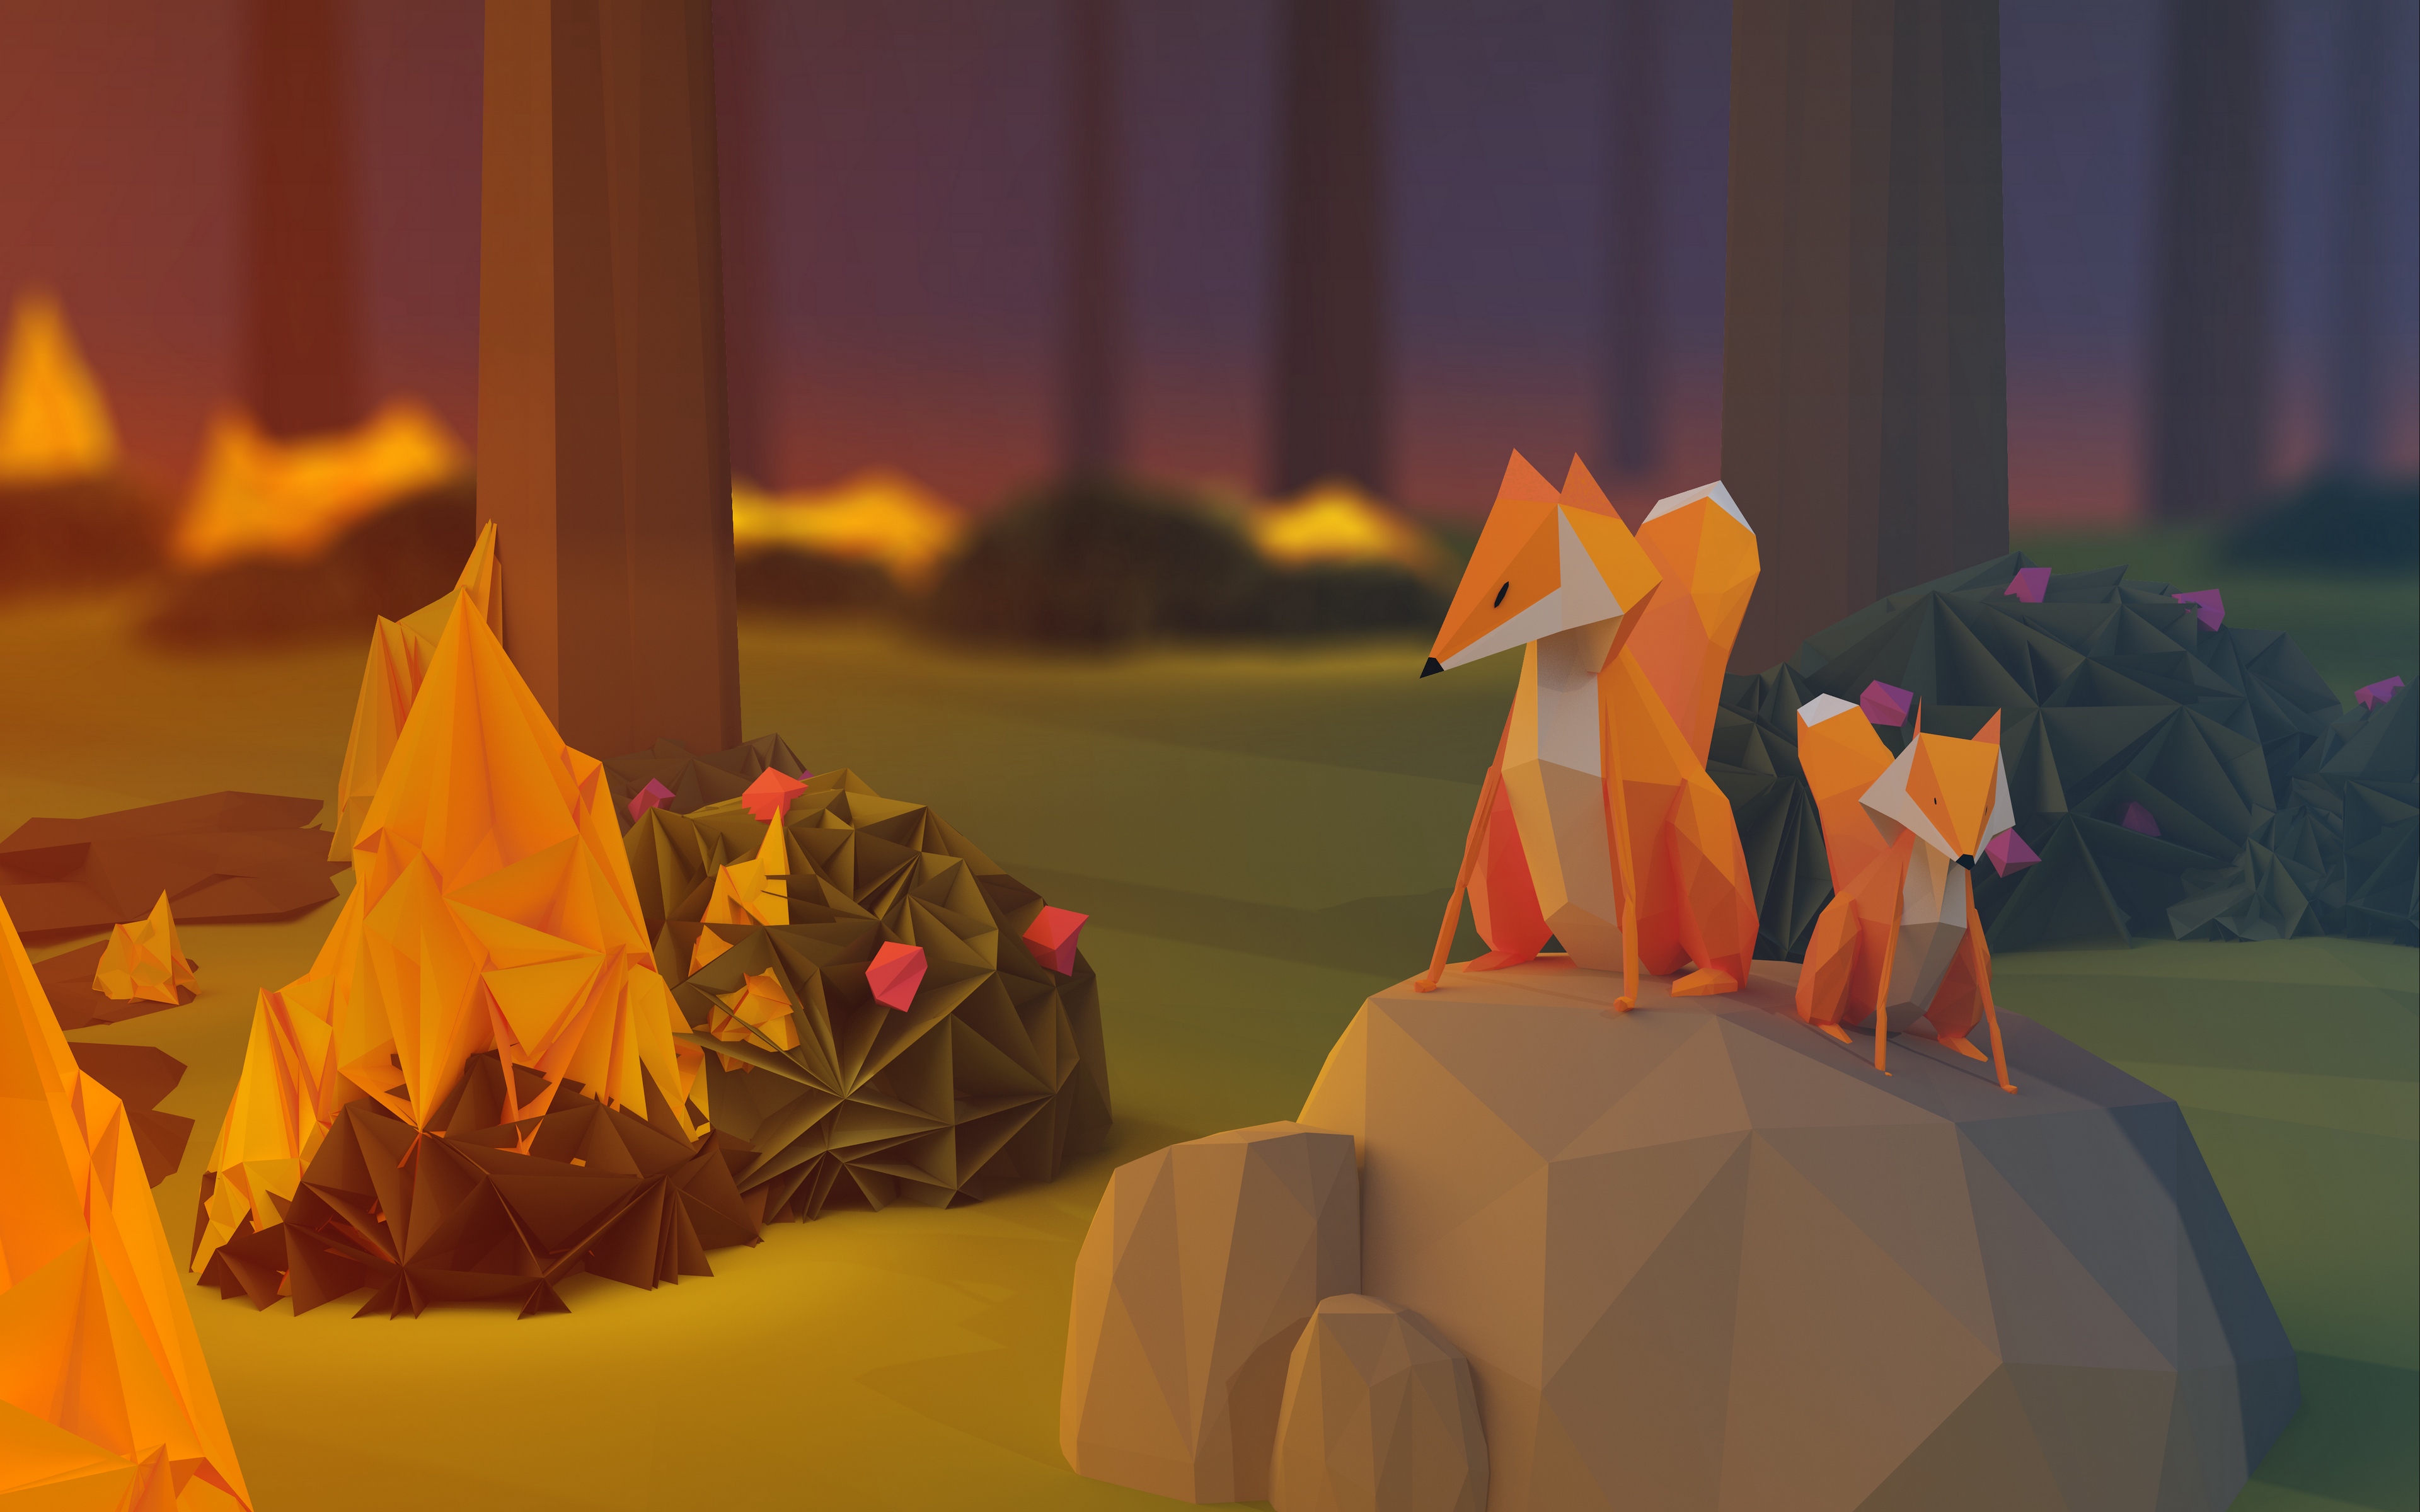 Origami Foxes [3840 x 2400]